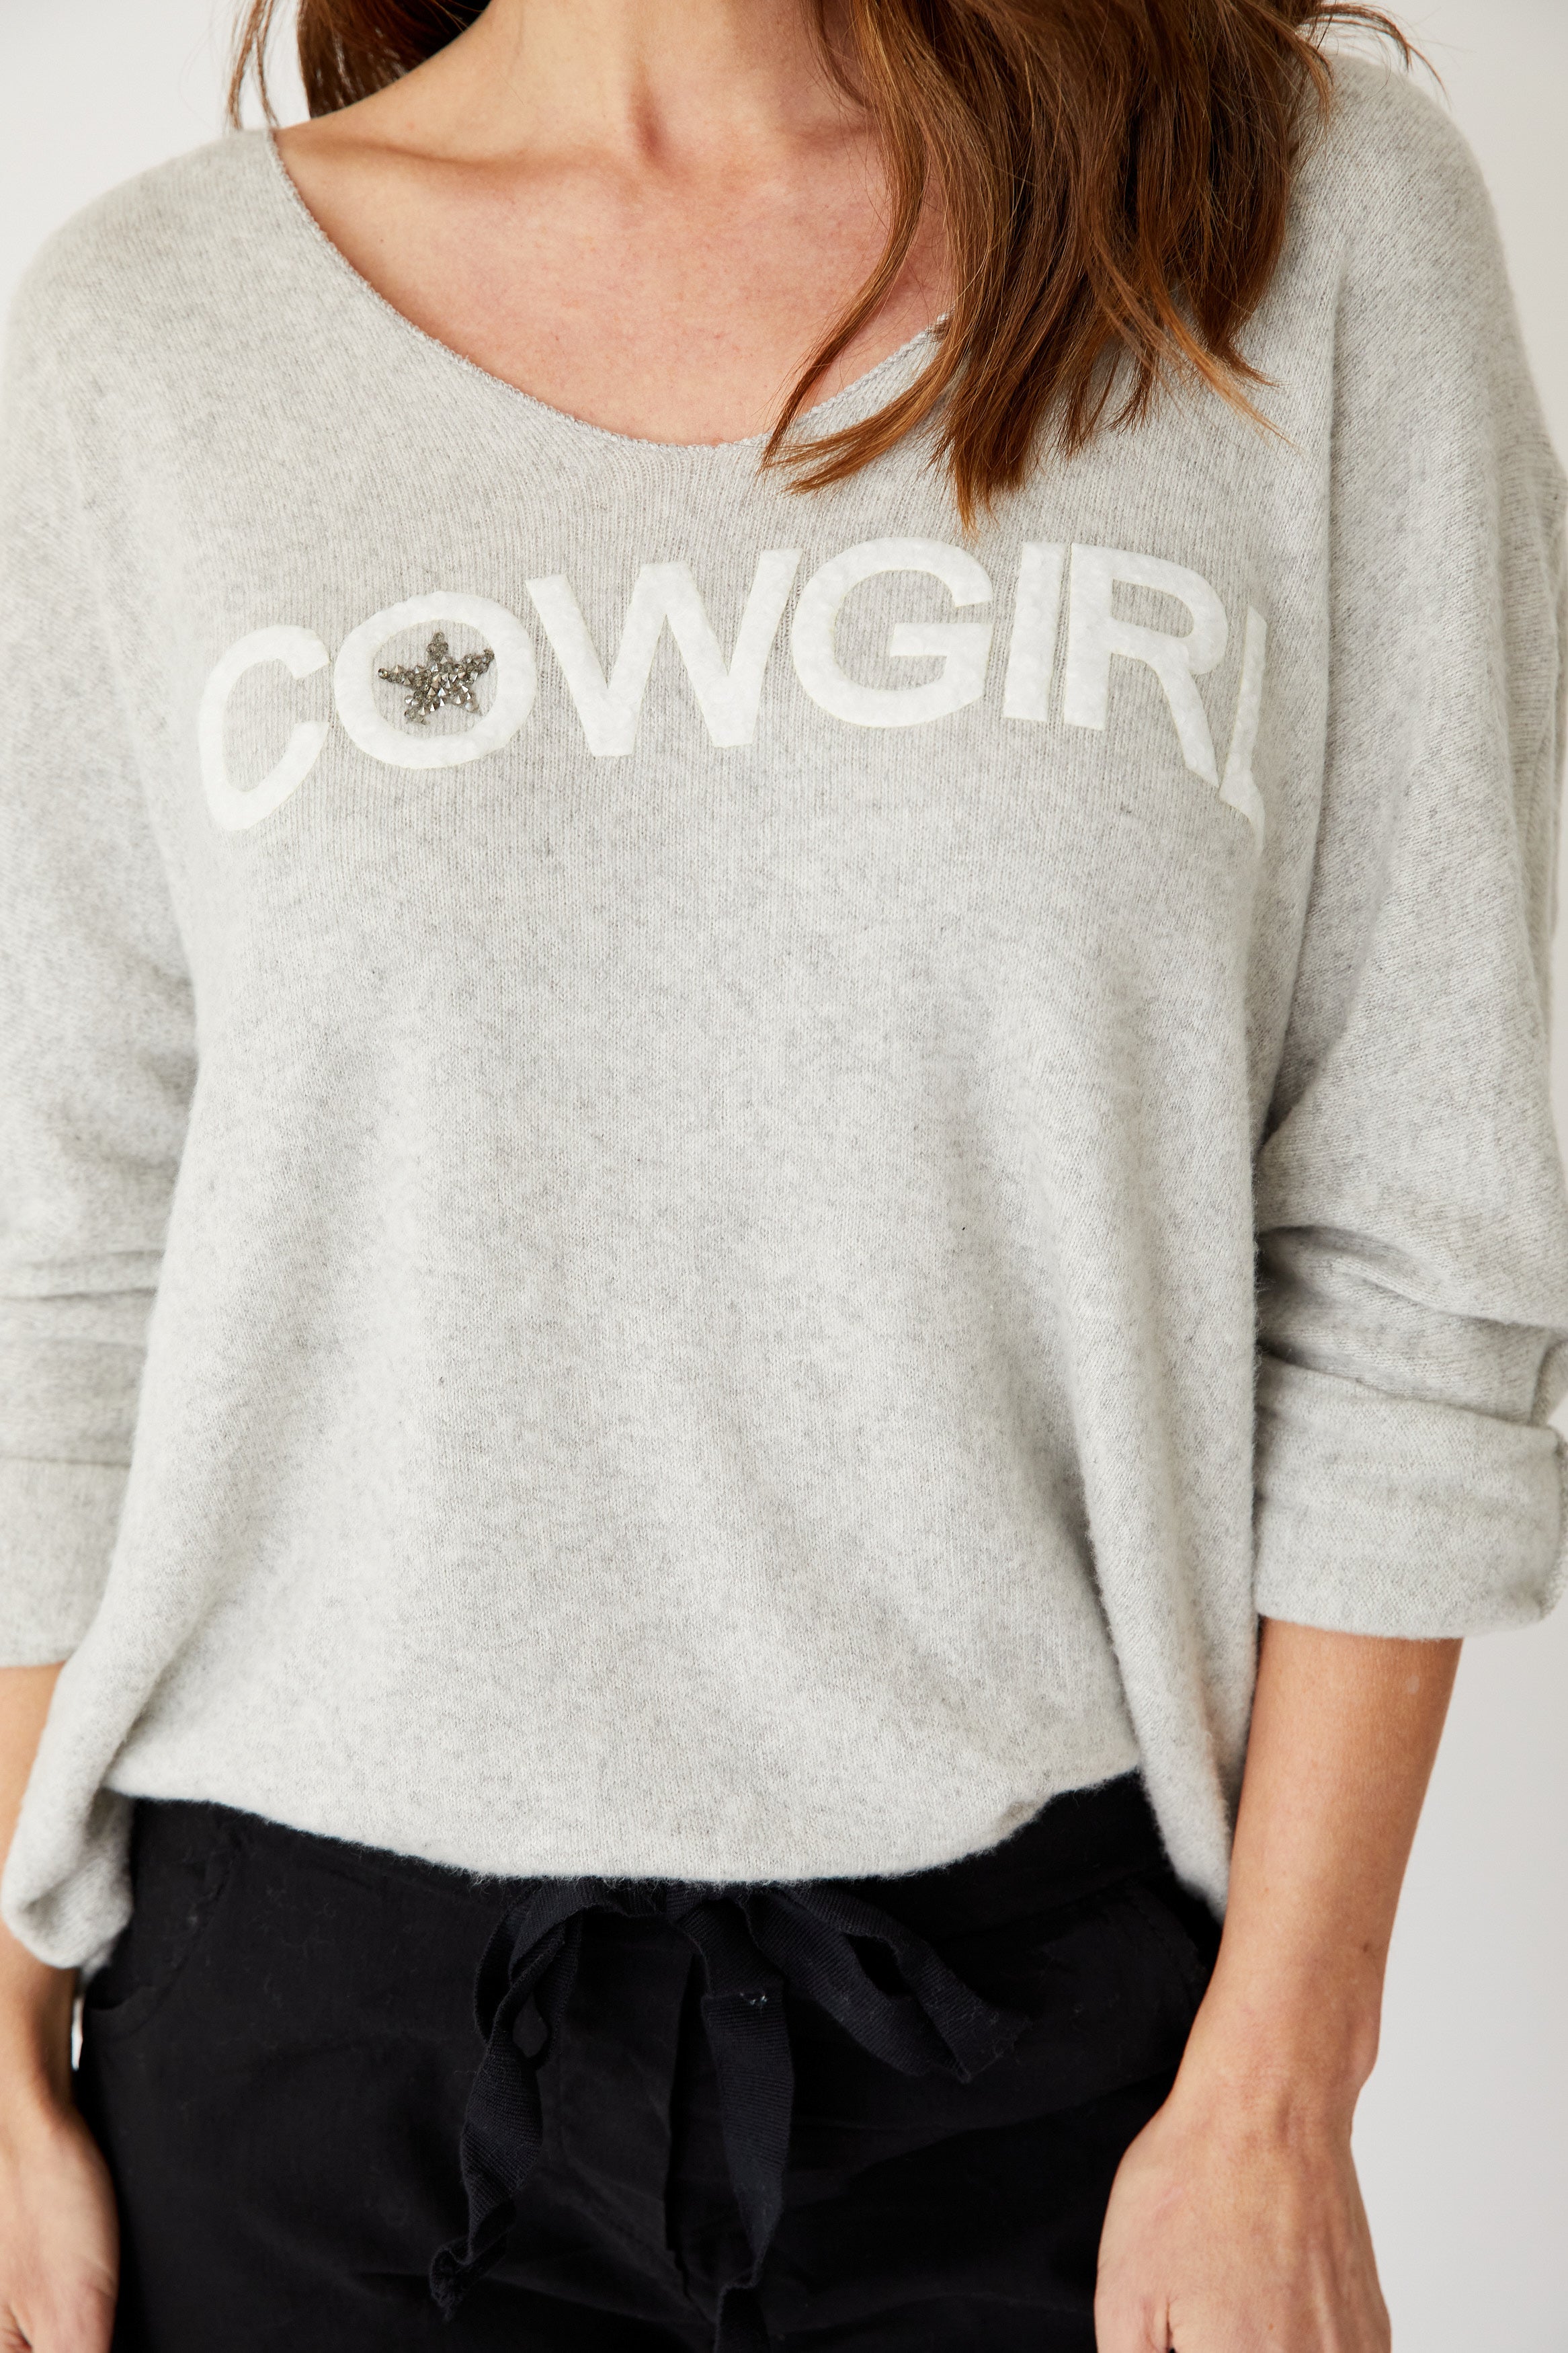 Cowgirl Sweater (Three Colors) - Jacqueline B Clothing